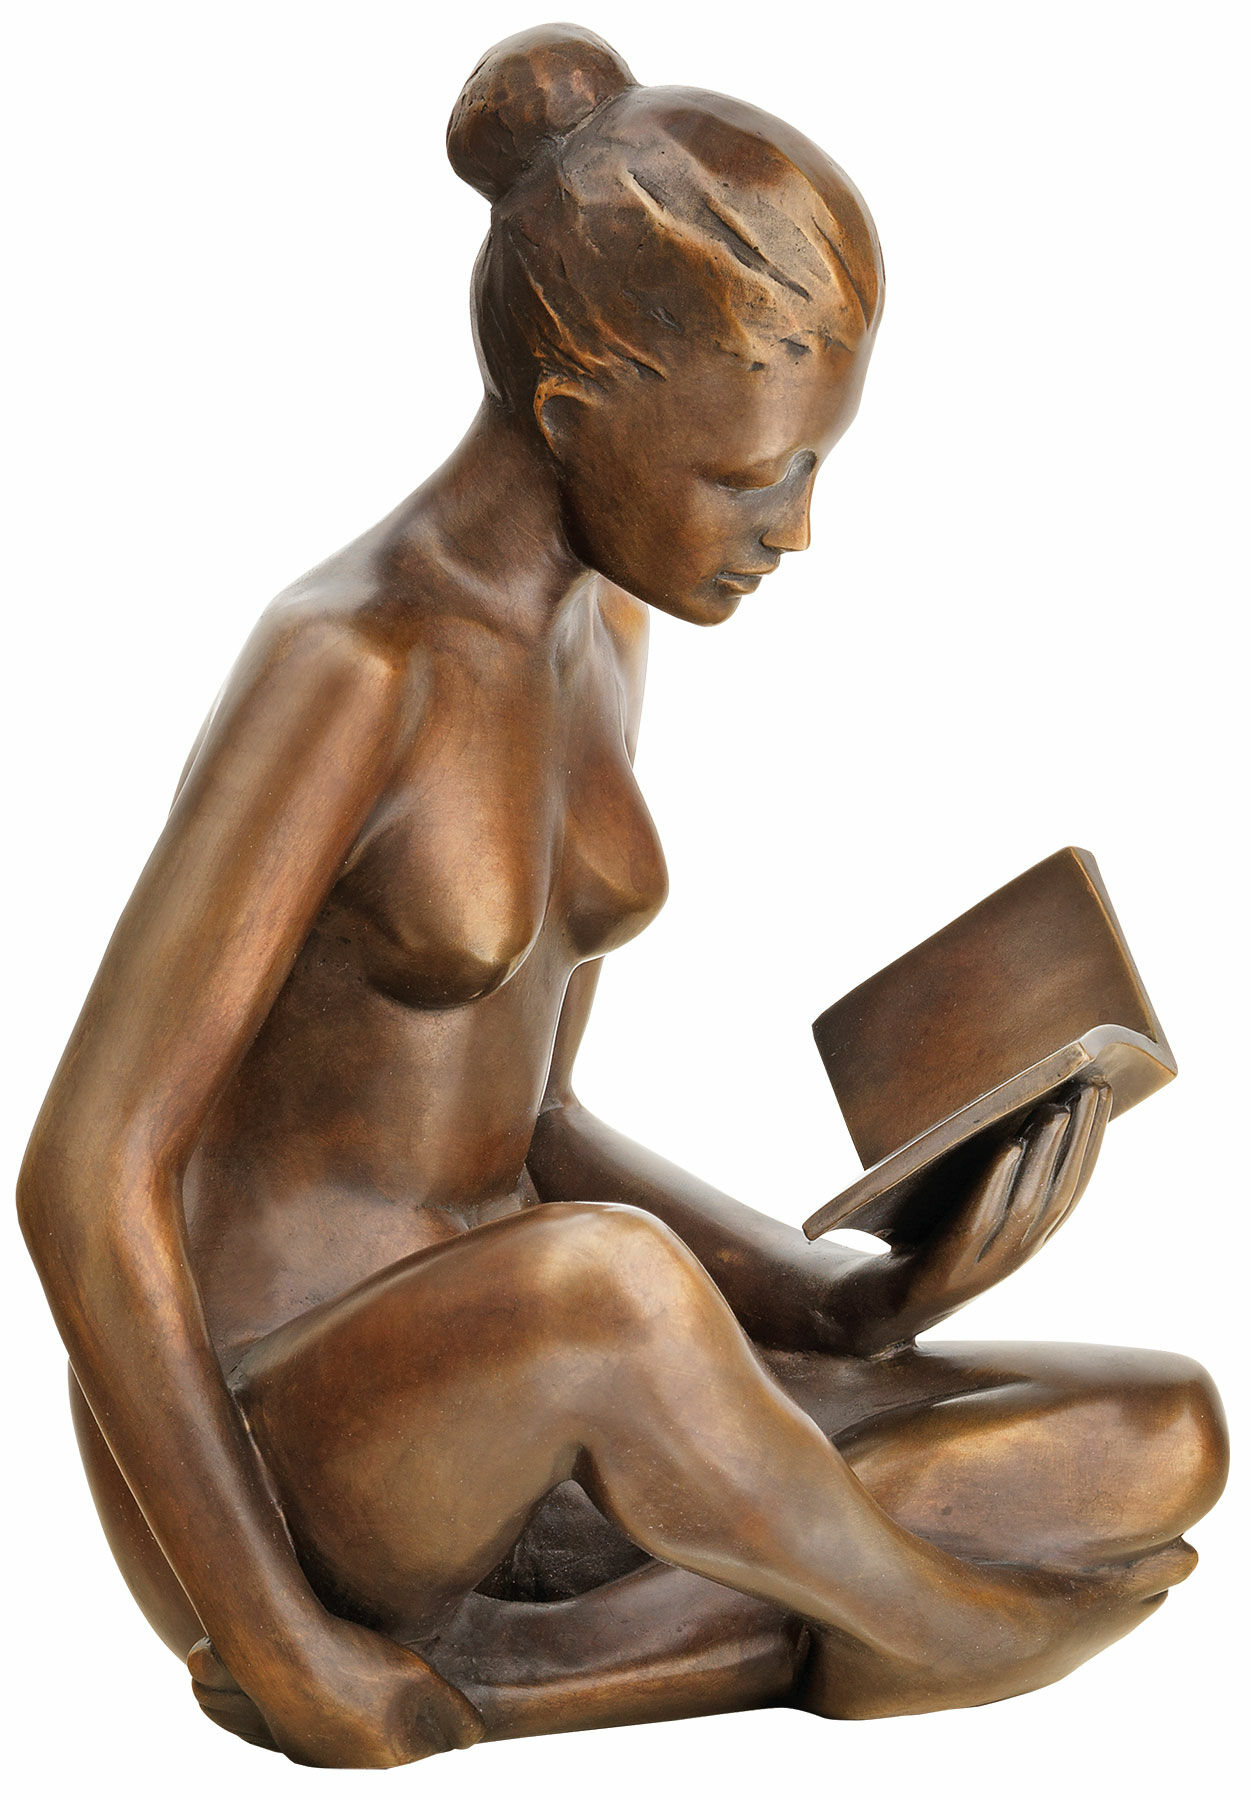 Sculpture "Reading Woman" (2018), bronze by SIME